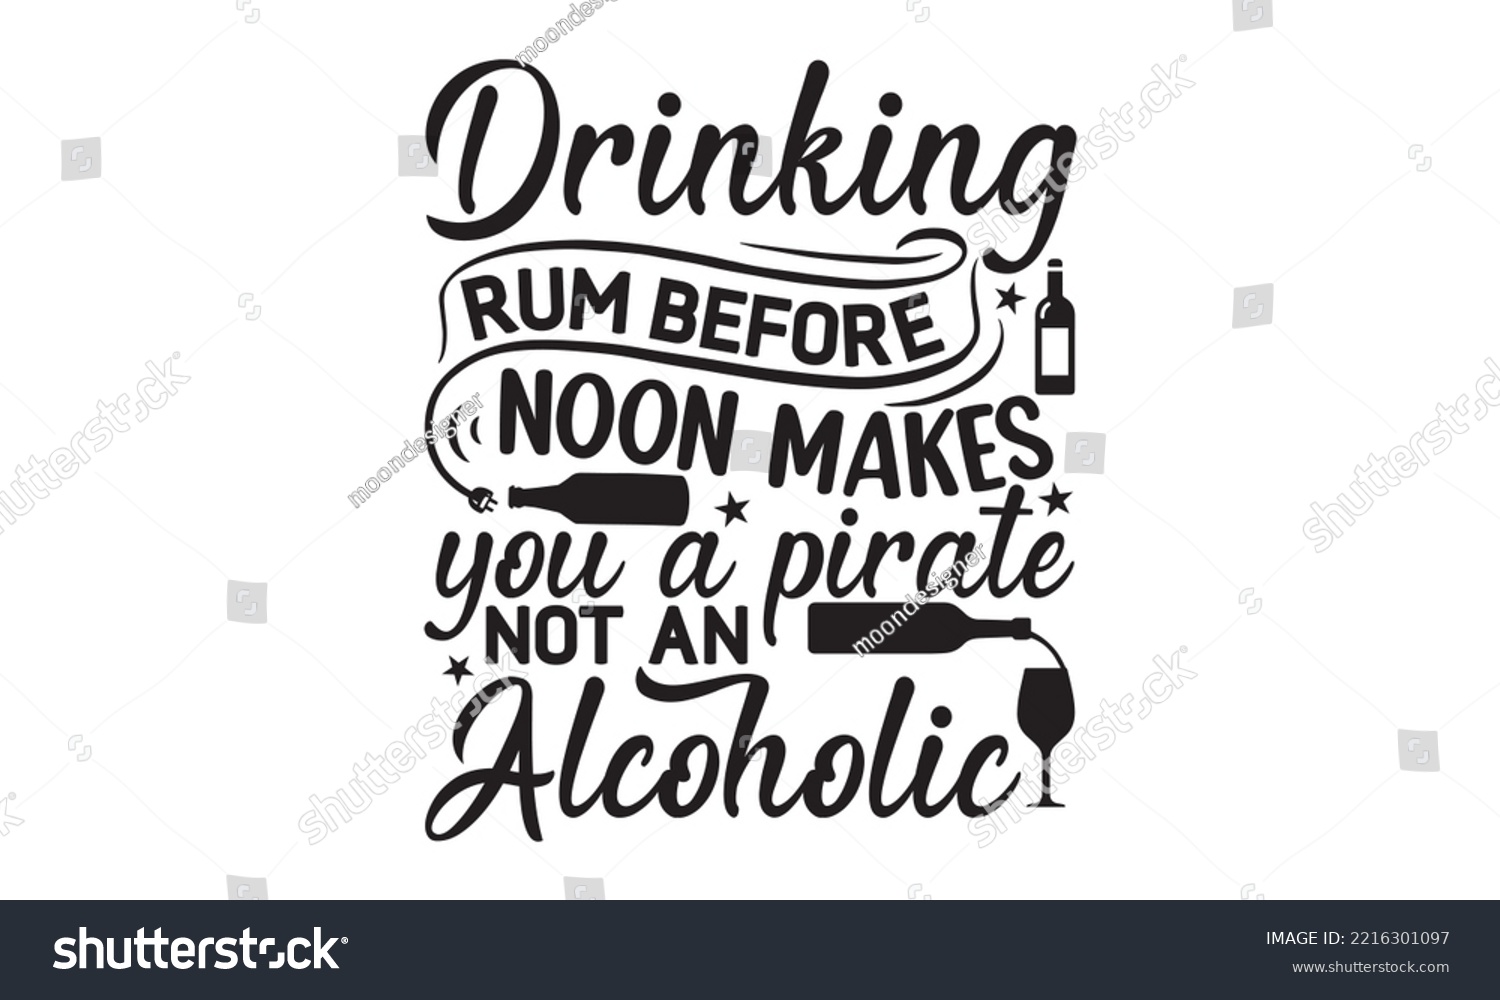 SVG of Drinking rum before noon makes you a pirate not an alcoholic - Alcohol SVG T Shirt design, Girl Beer Design, Prost, Pretzels and Beer, Vector EPS Editable Files, Alcohol funny quotes, Oktoberfest Alco svg